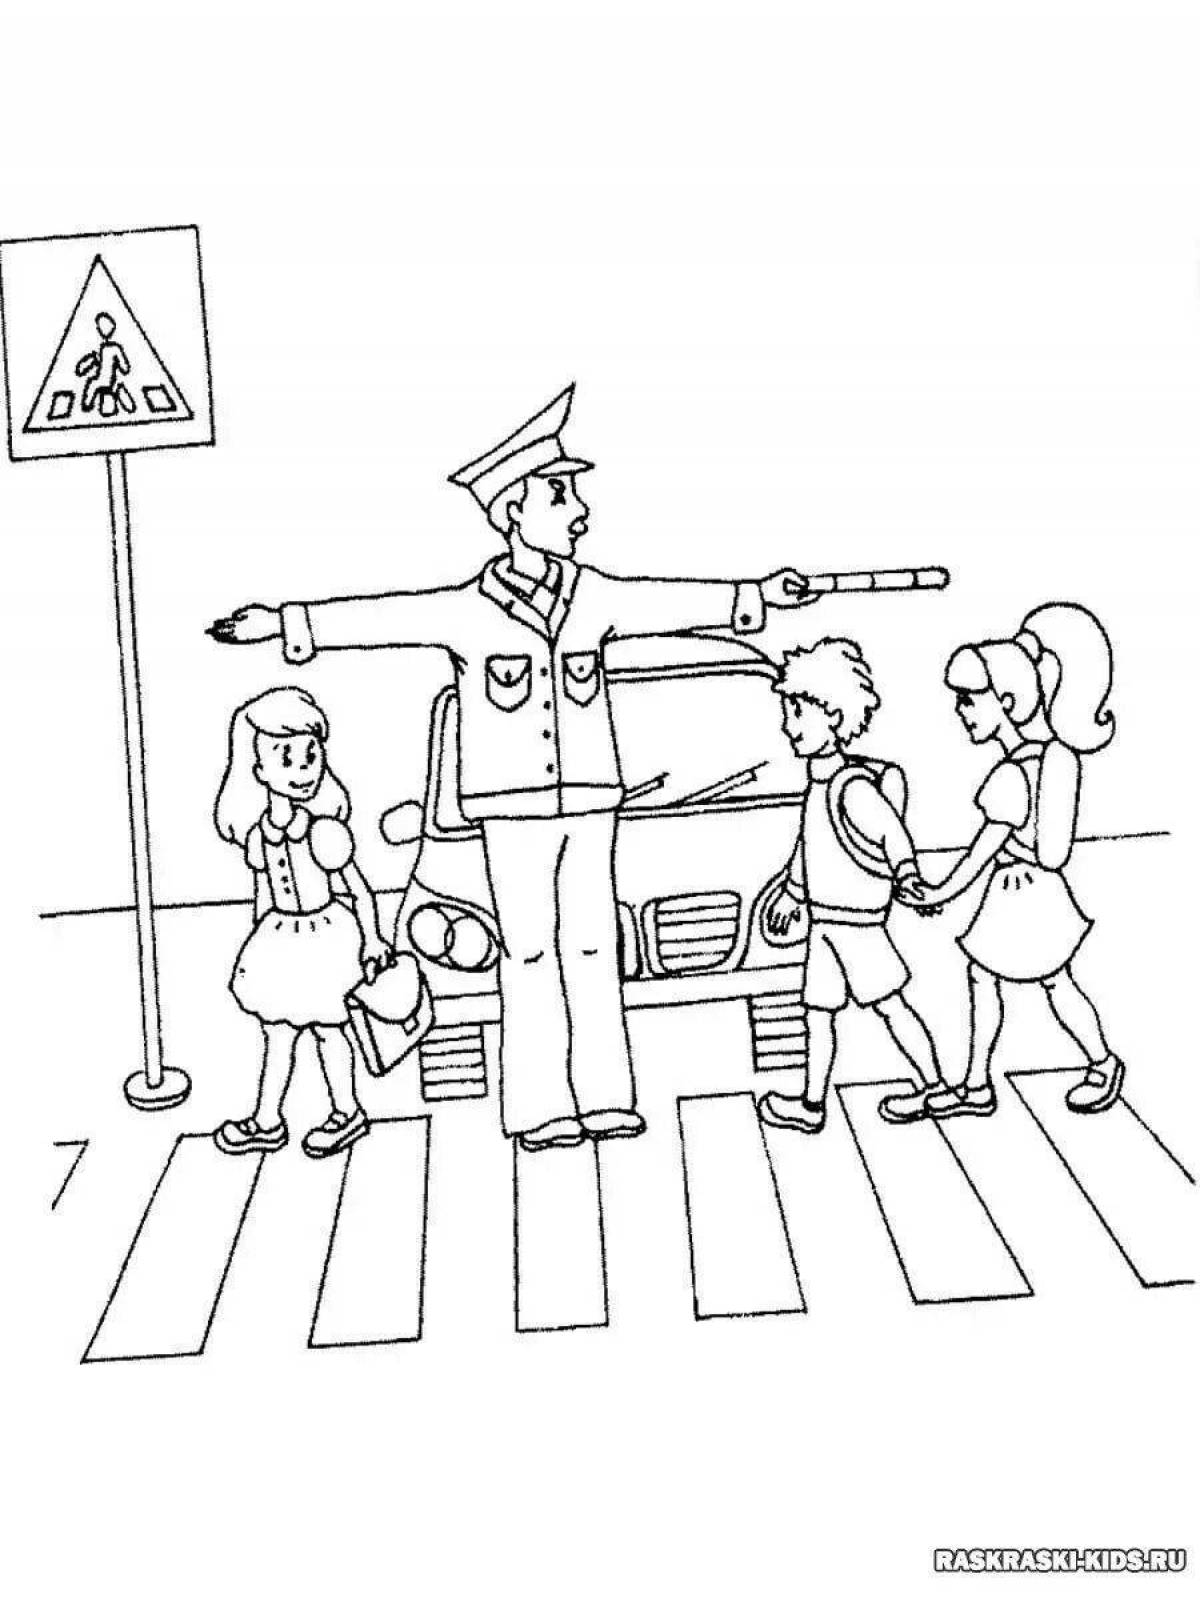 Fun coloring book for kids traffic rules for preschoolers